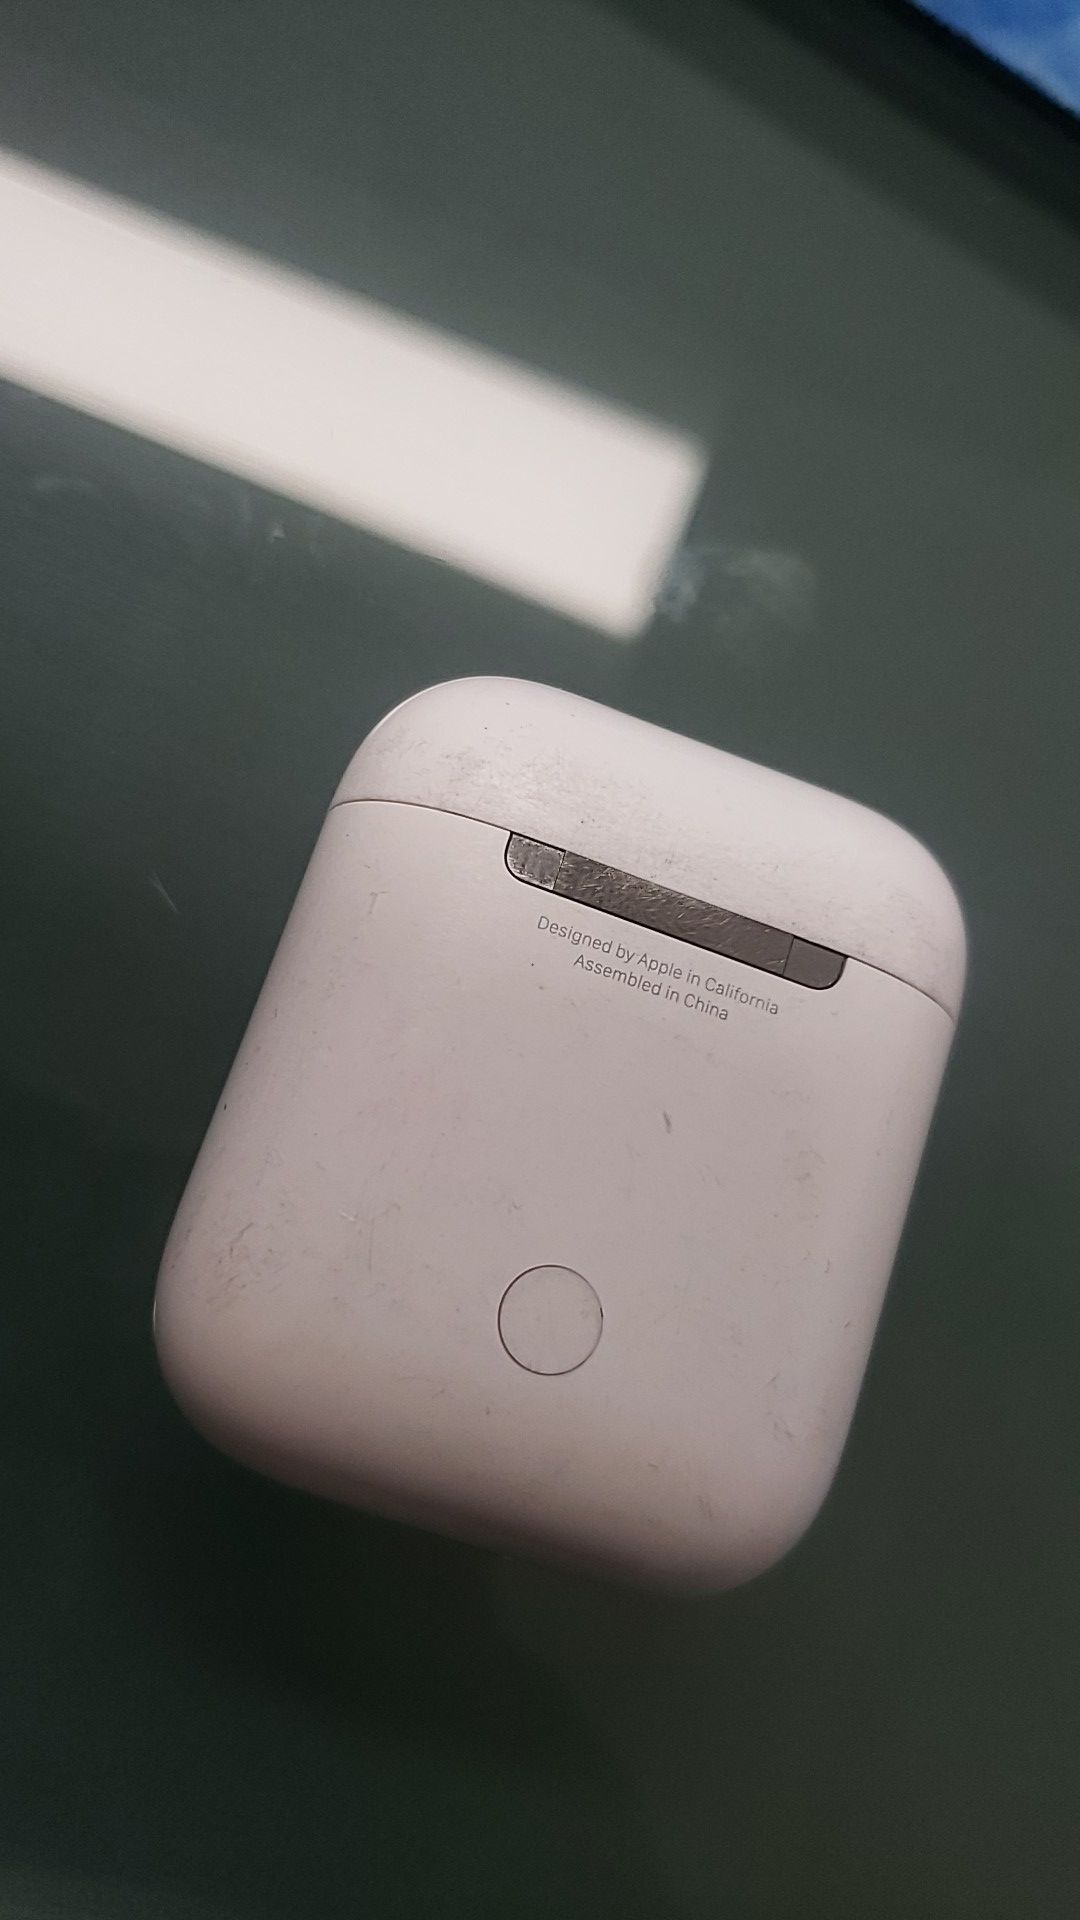 Apple Airpods (1st generation)